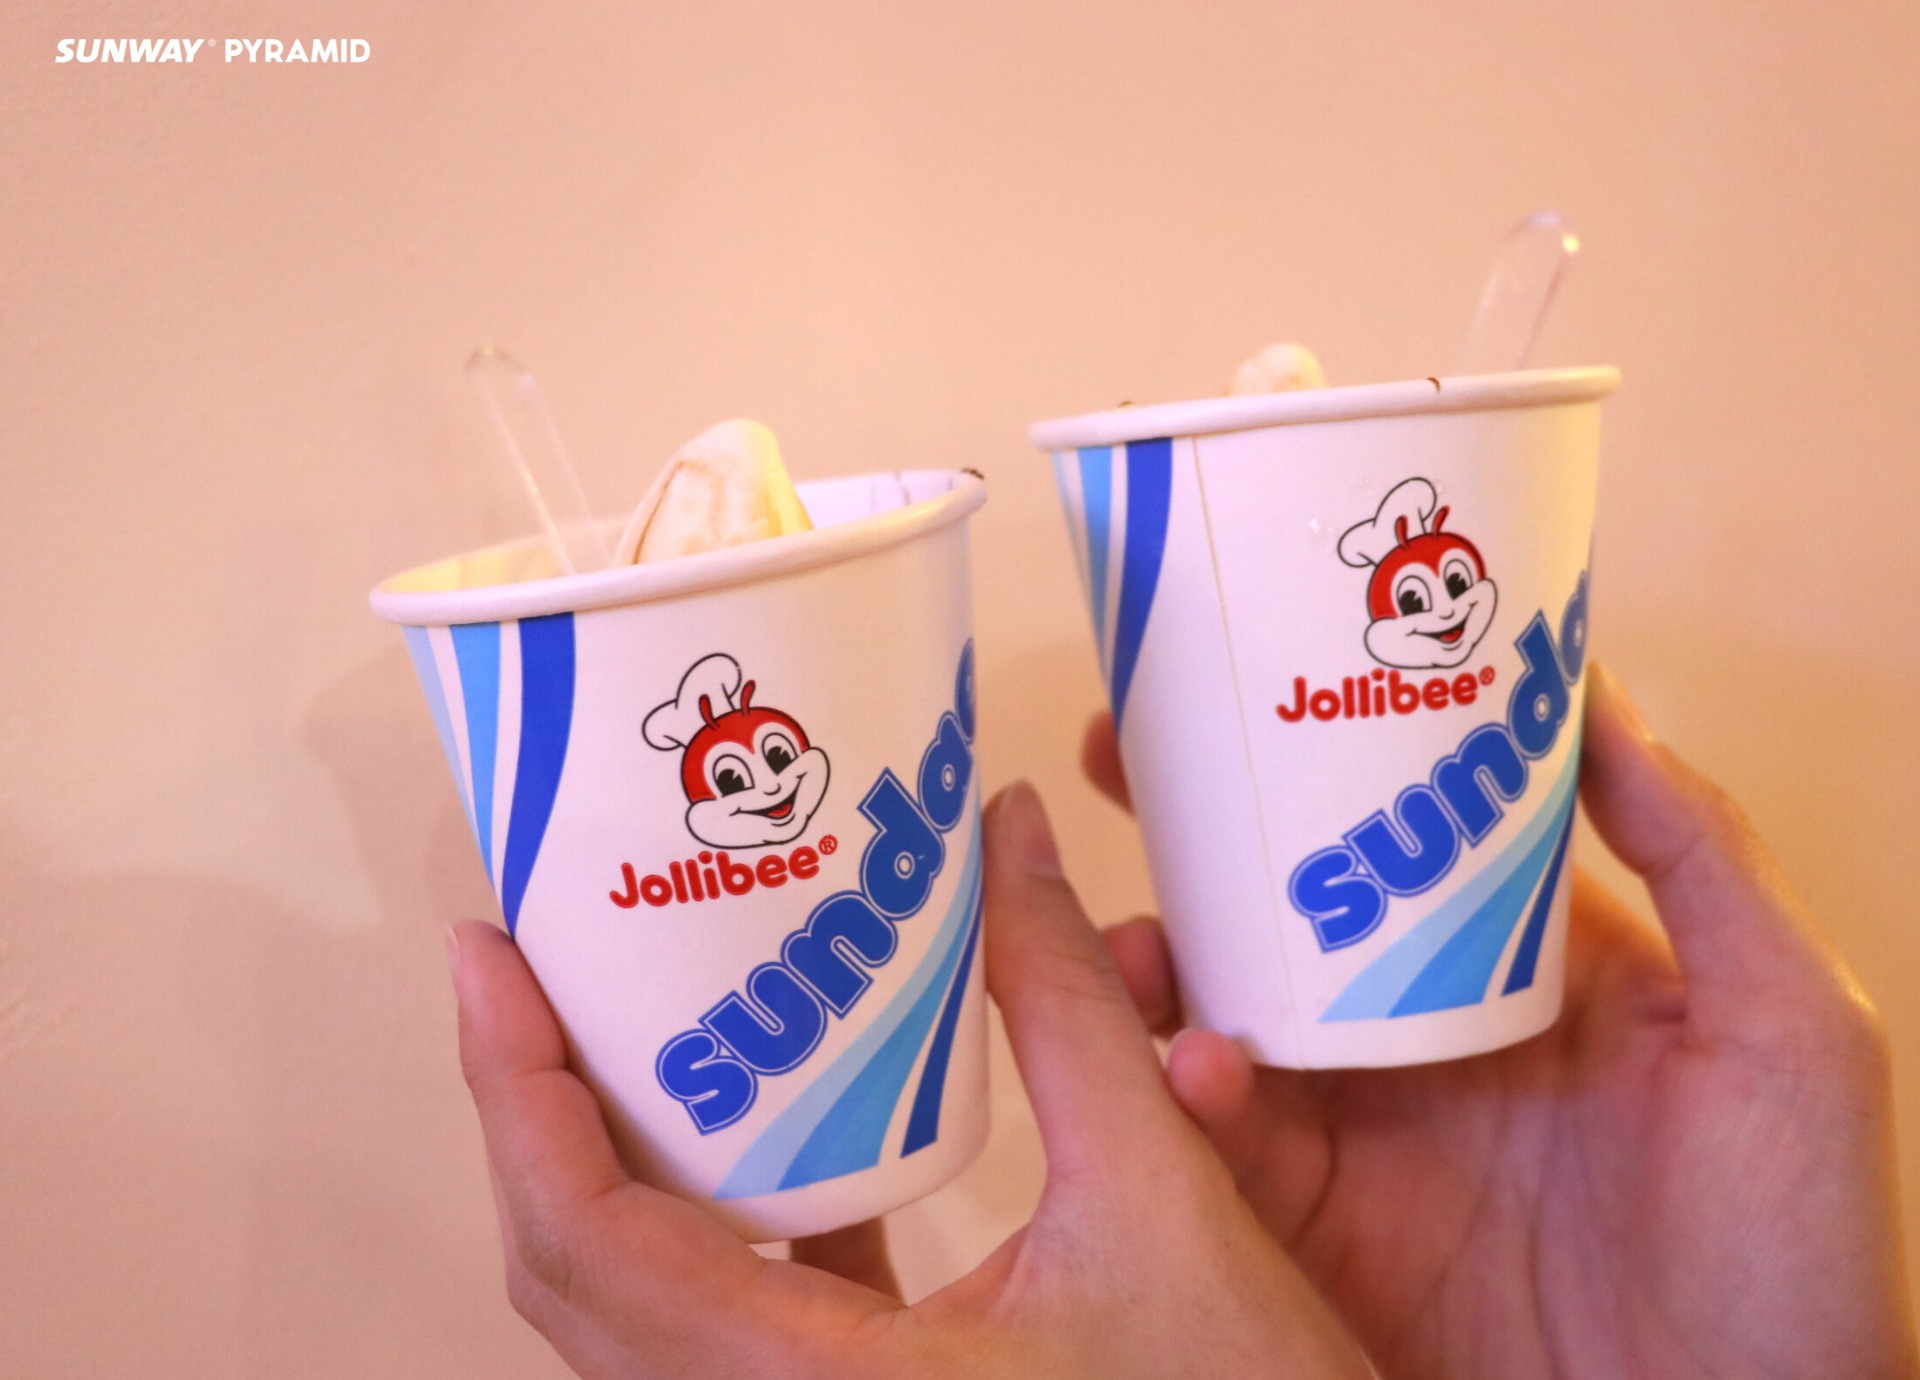 Jollibee Is Opening Its 1st Outlet In West Malaysia At Sunway Pyramid  Tomorrow